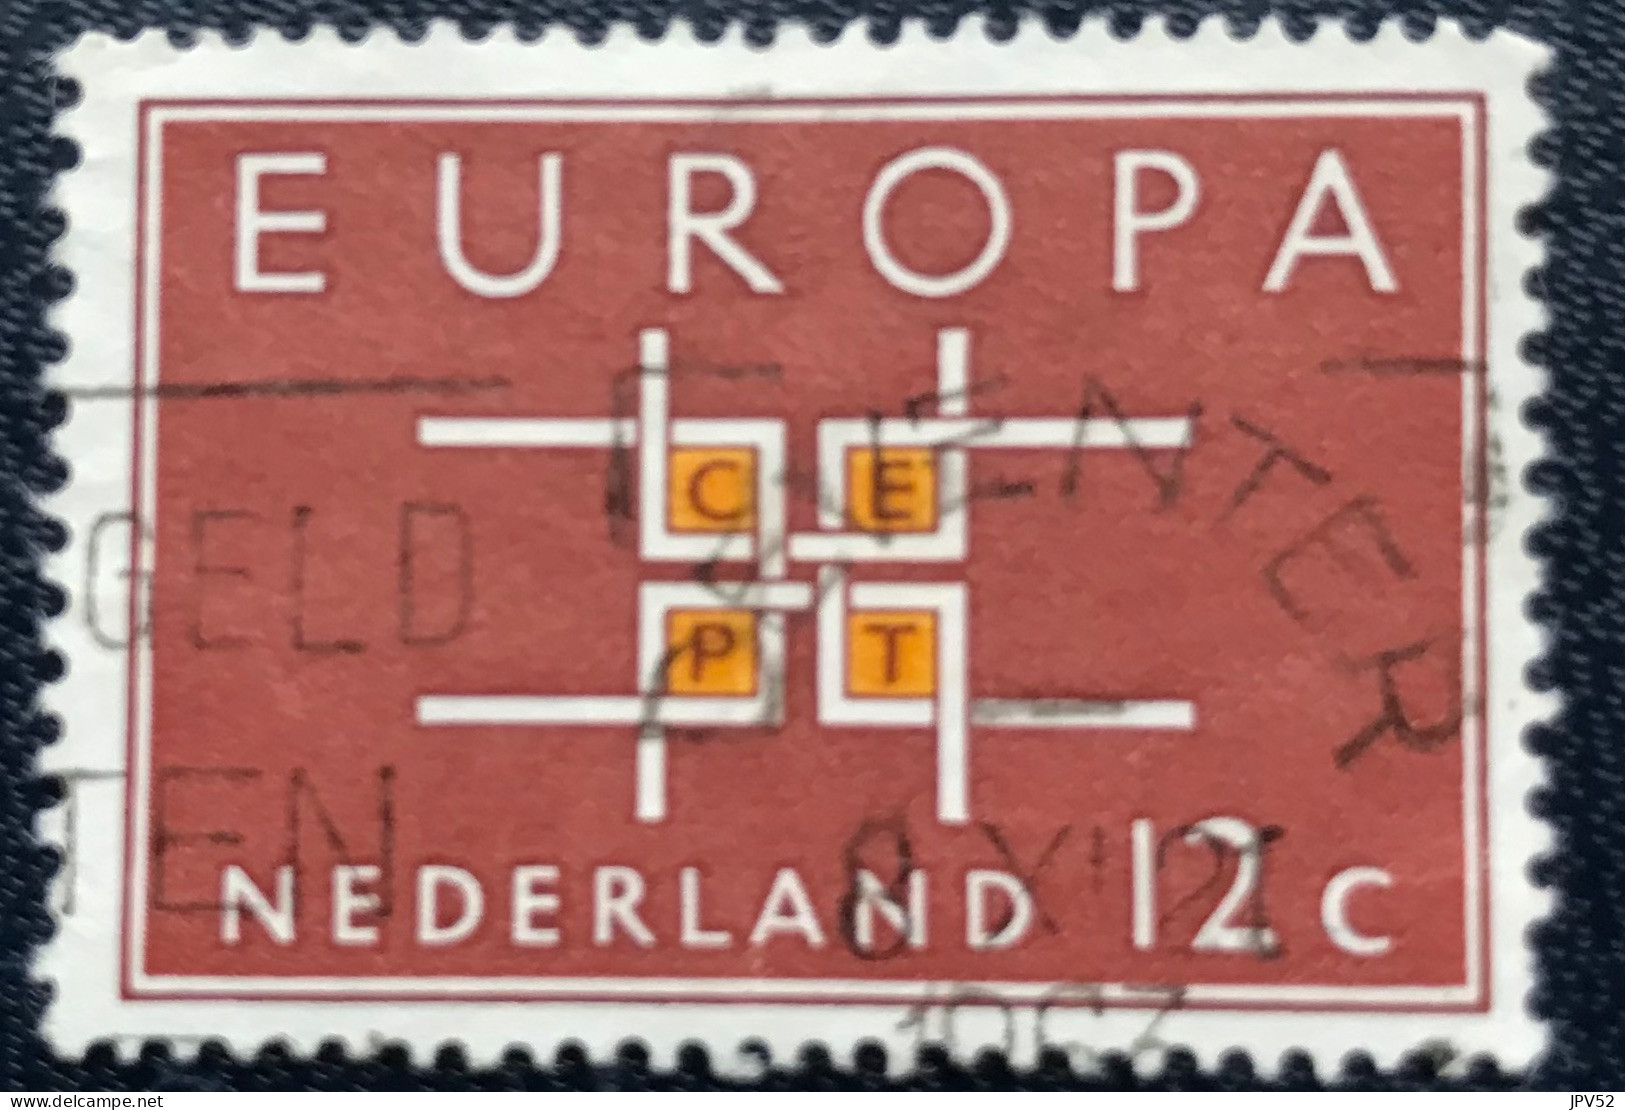 Nederland - C14/63 - 1963 - (°)used - Michel 806 - Europa - CEPT - DEVENTER - Used Stamps